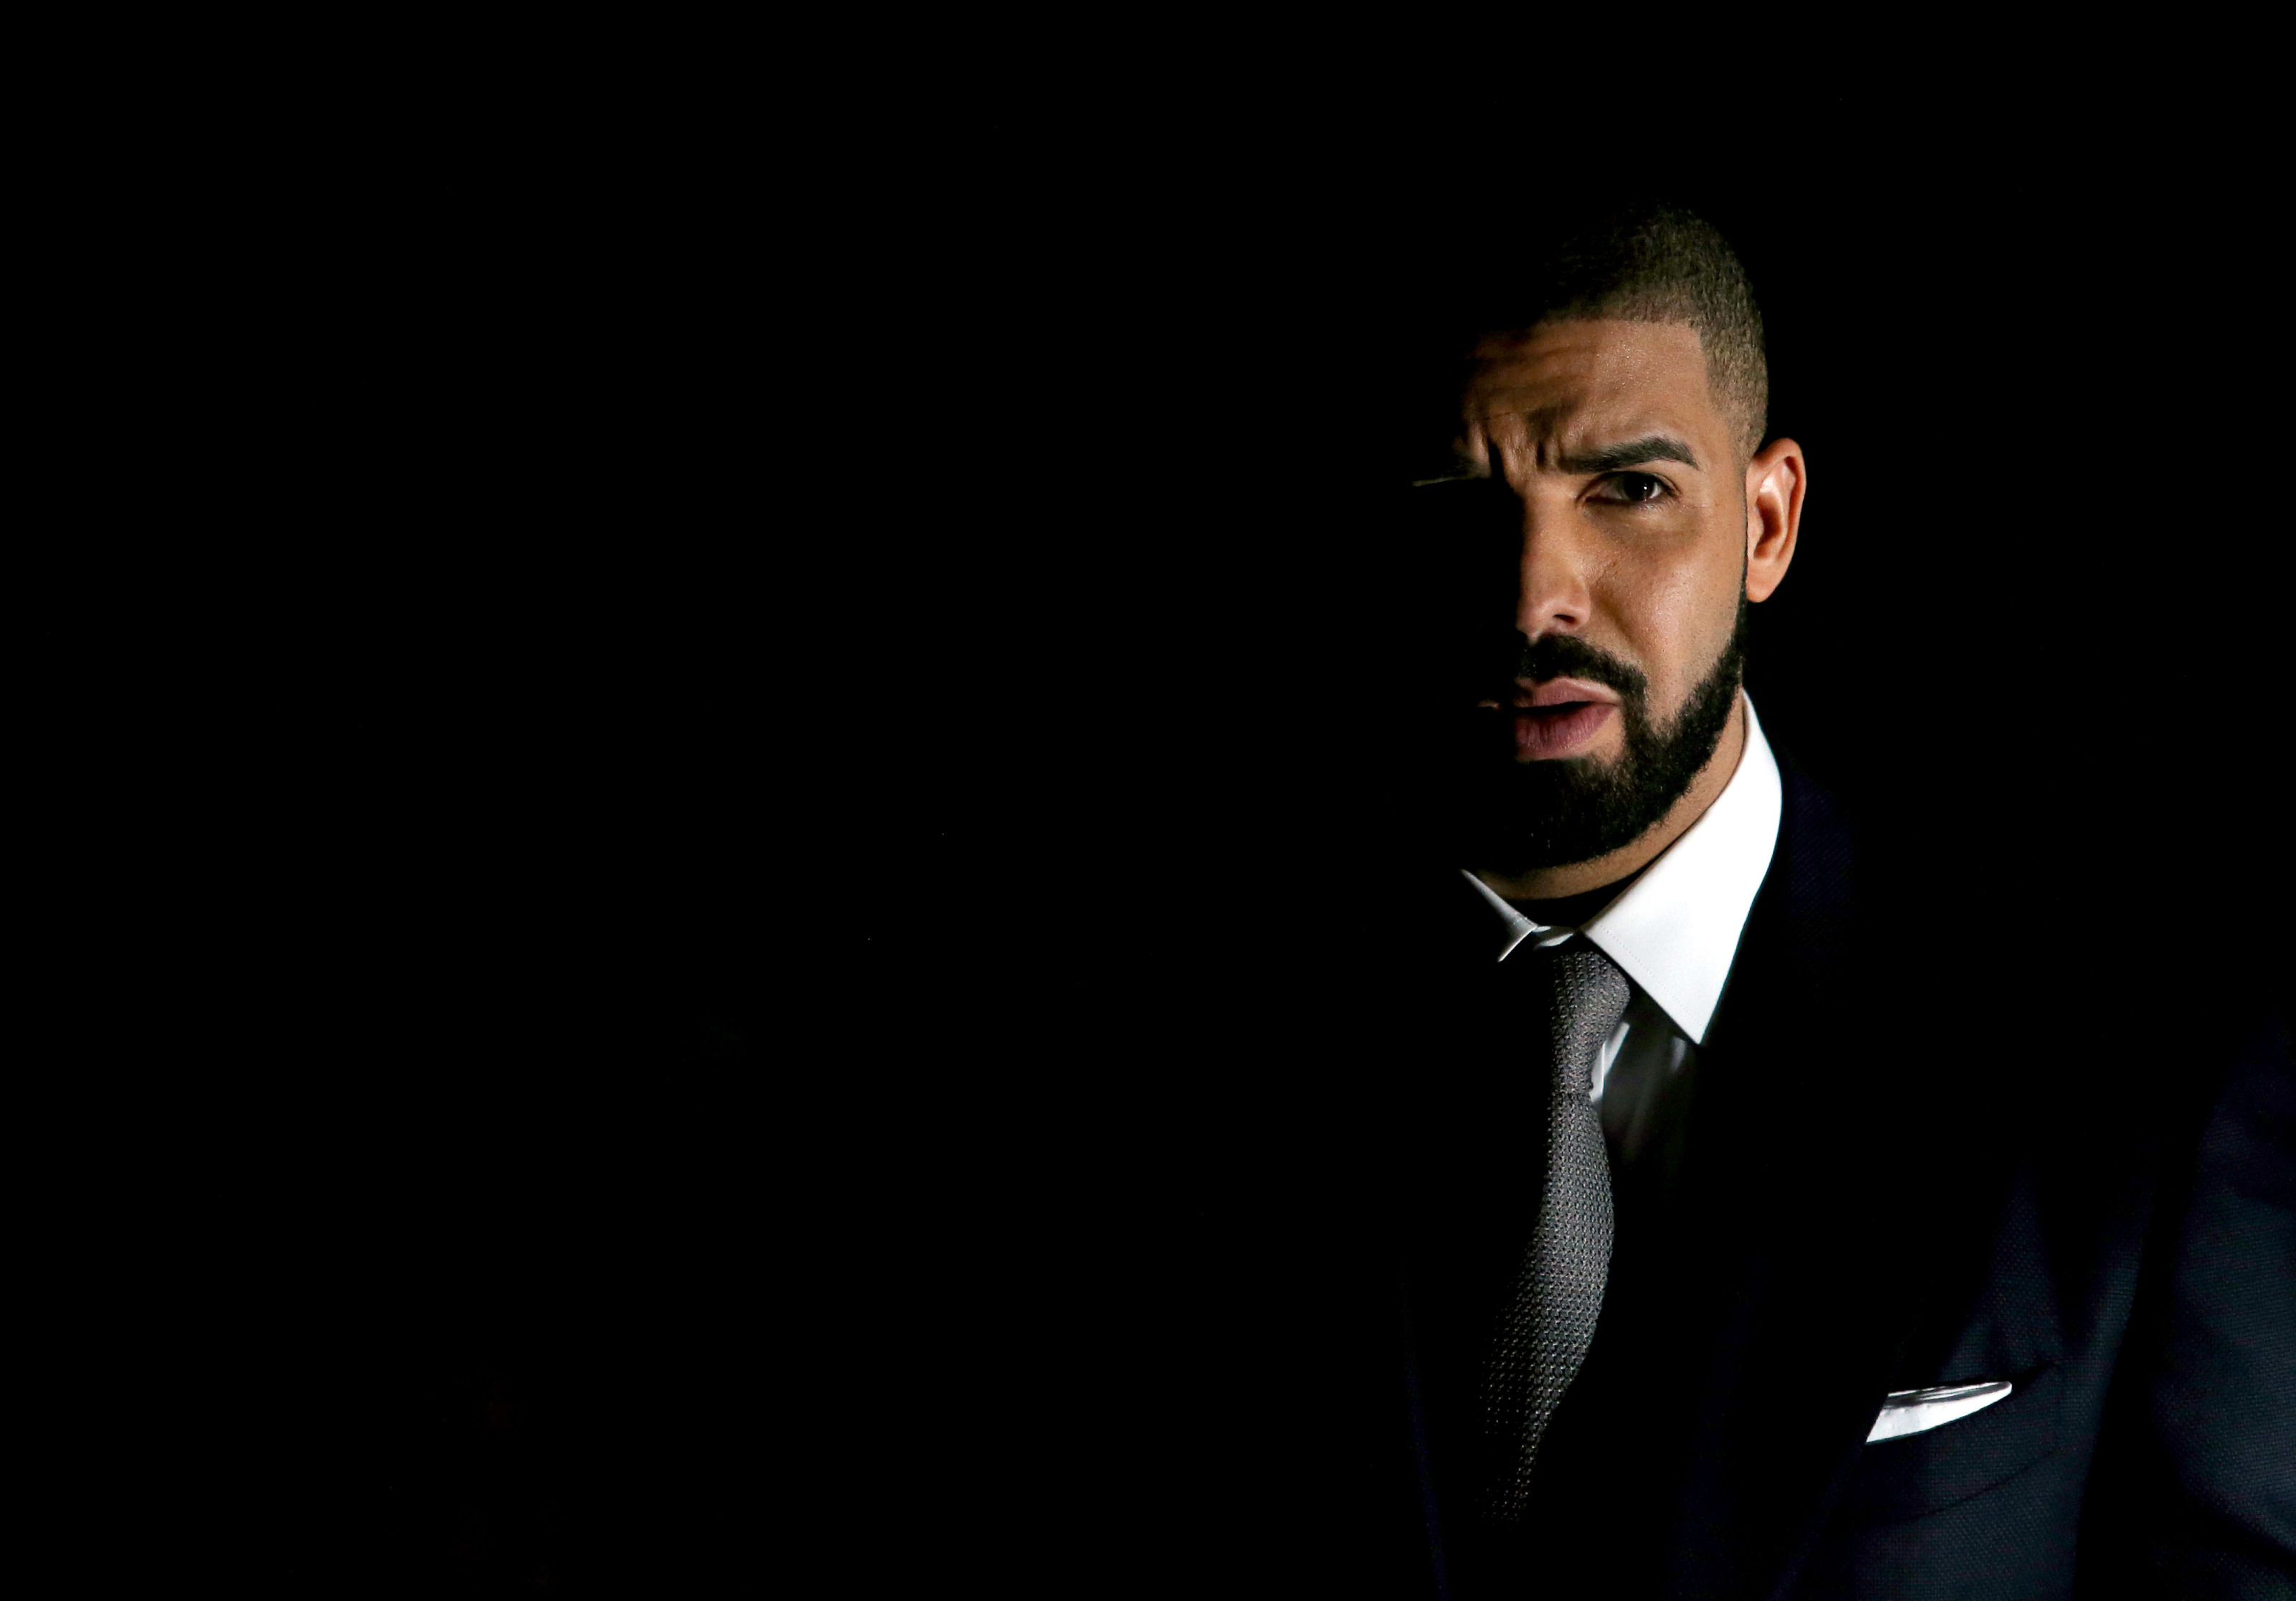 Toronto upset with Drake after Maple Leafs lose to Bruins